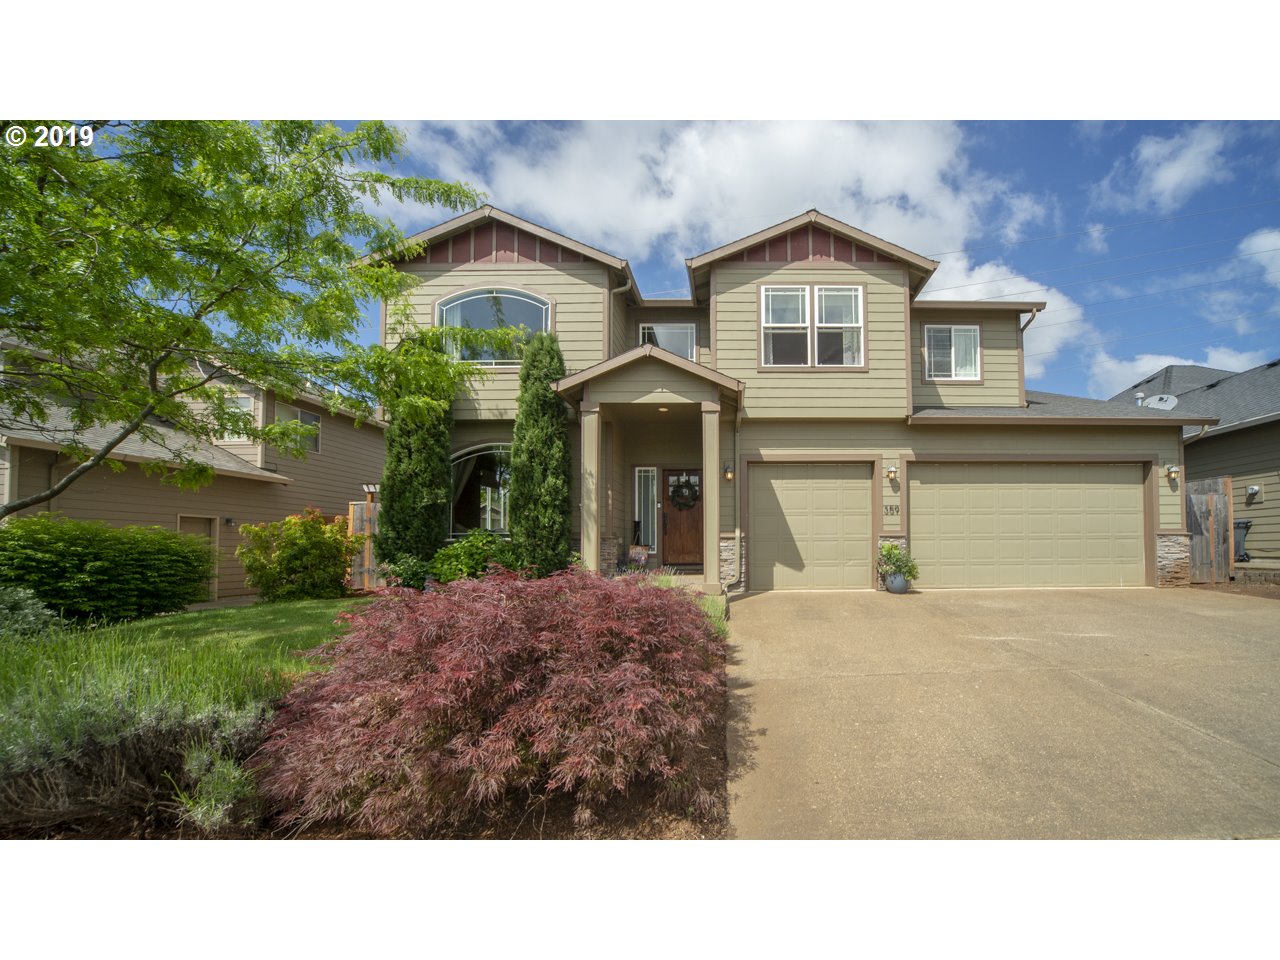 359 NW EAGLE FEATHER ST (1 of 32)